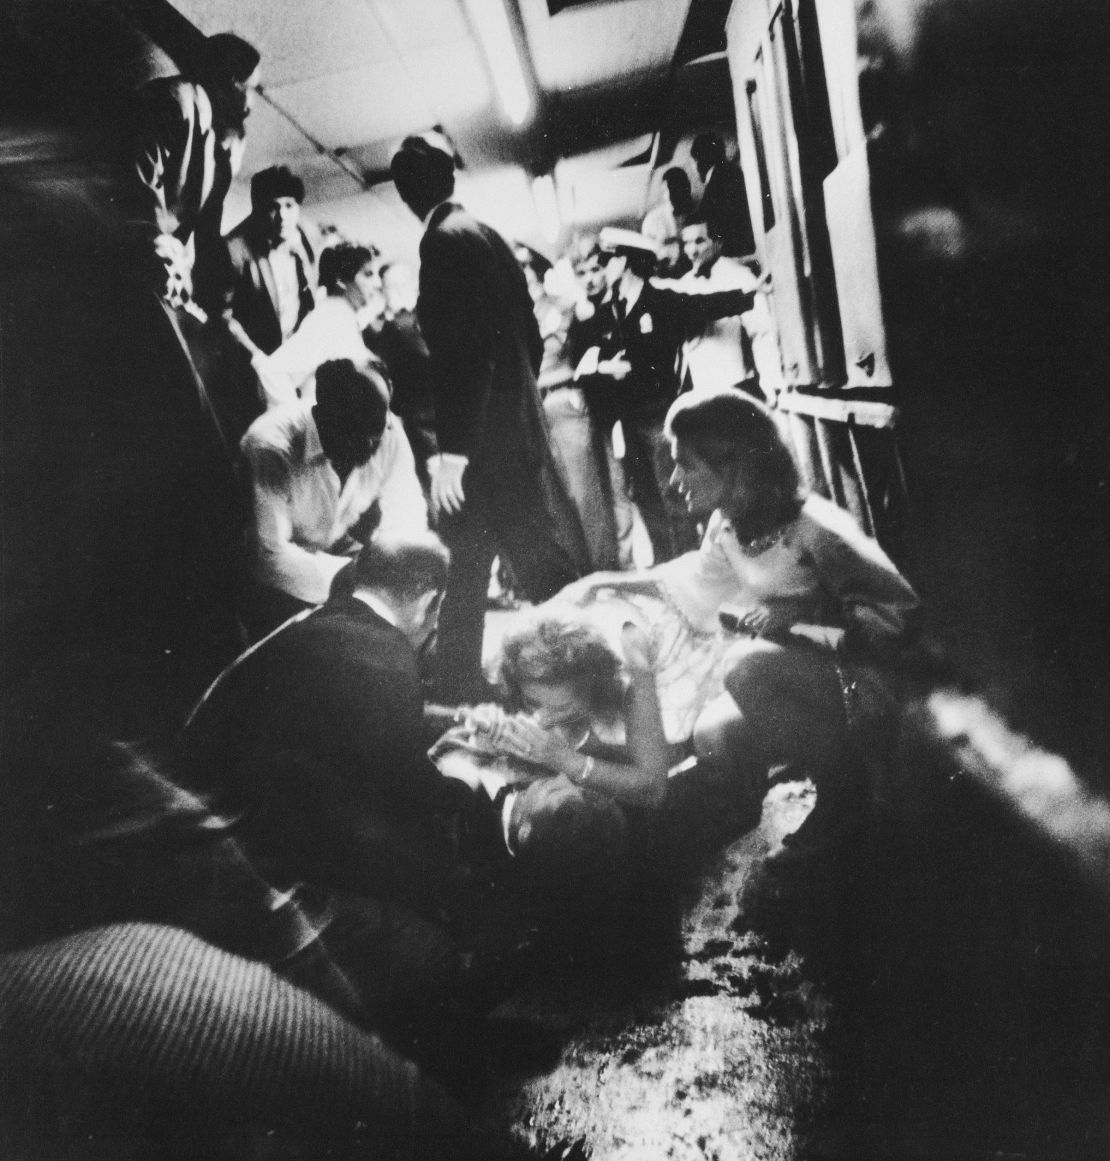 Robert F. Kennedy lies wounded on the floor of the Ambassador Hotel's kitchen while his wife Ethel leans over him on June 5, 1968, in Los Angeles.